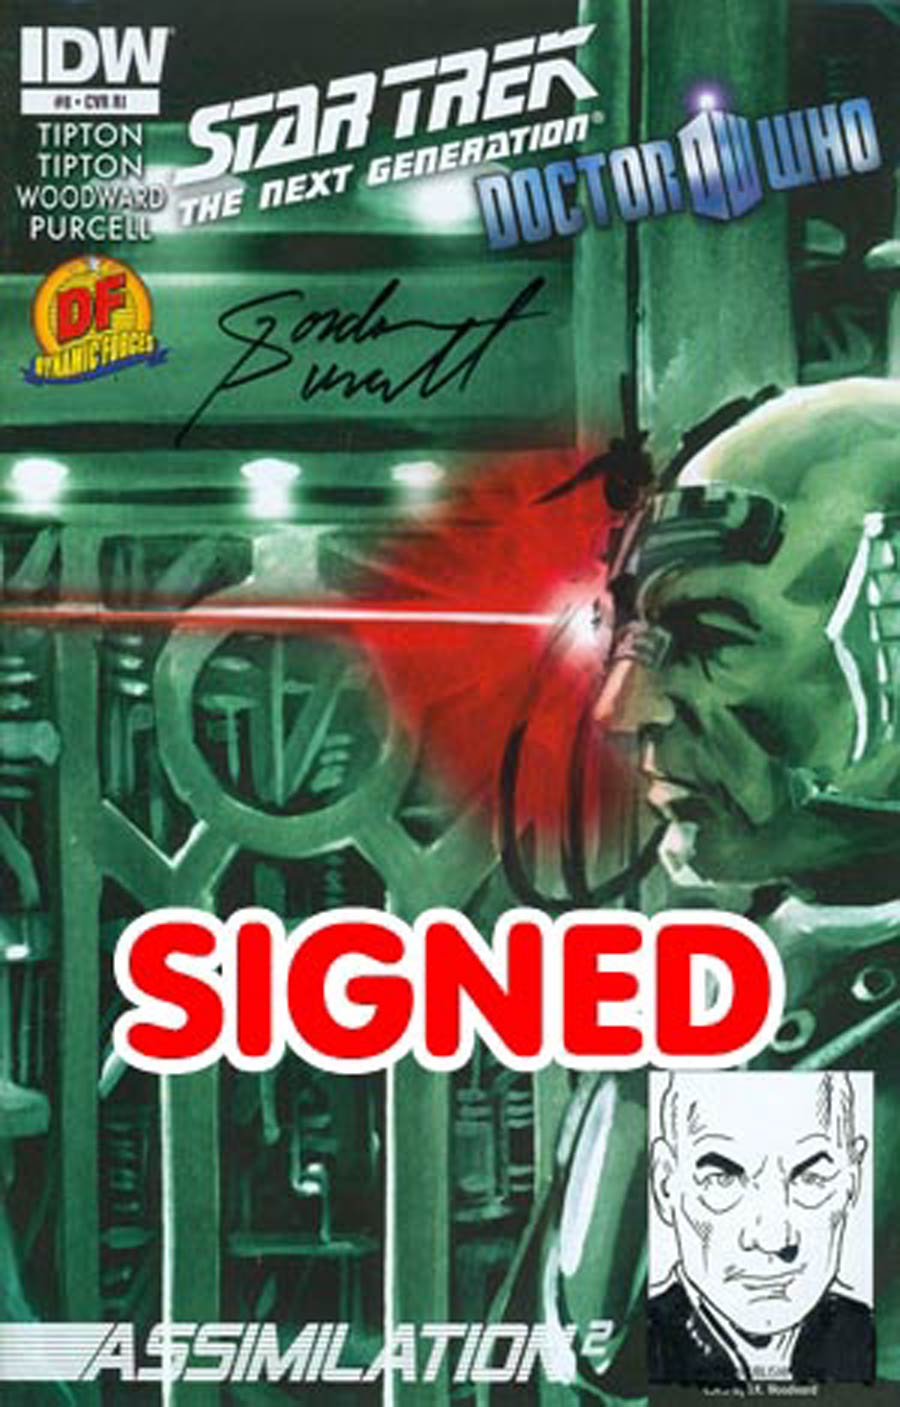 Star Trek The Next Generation Doctor Who Assimilation2 #8 Cover E DF Signed & Remarked By Gordon Purcell